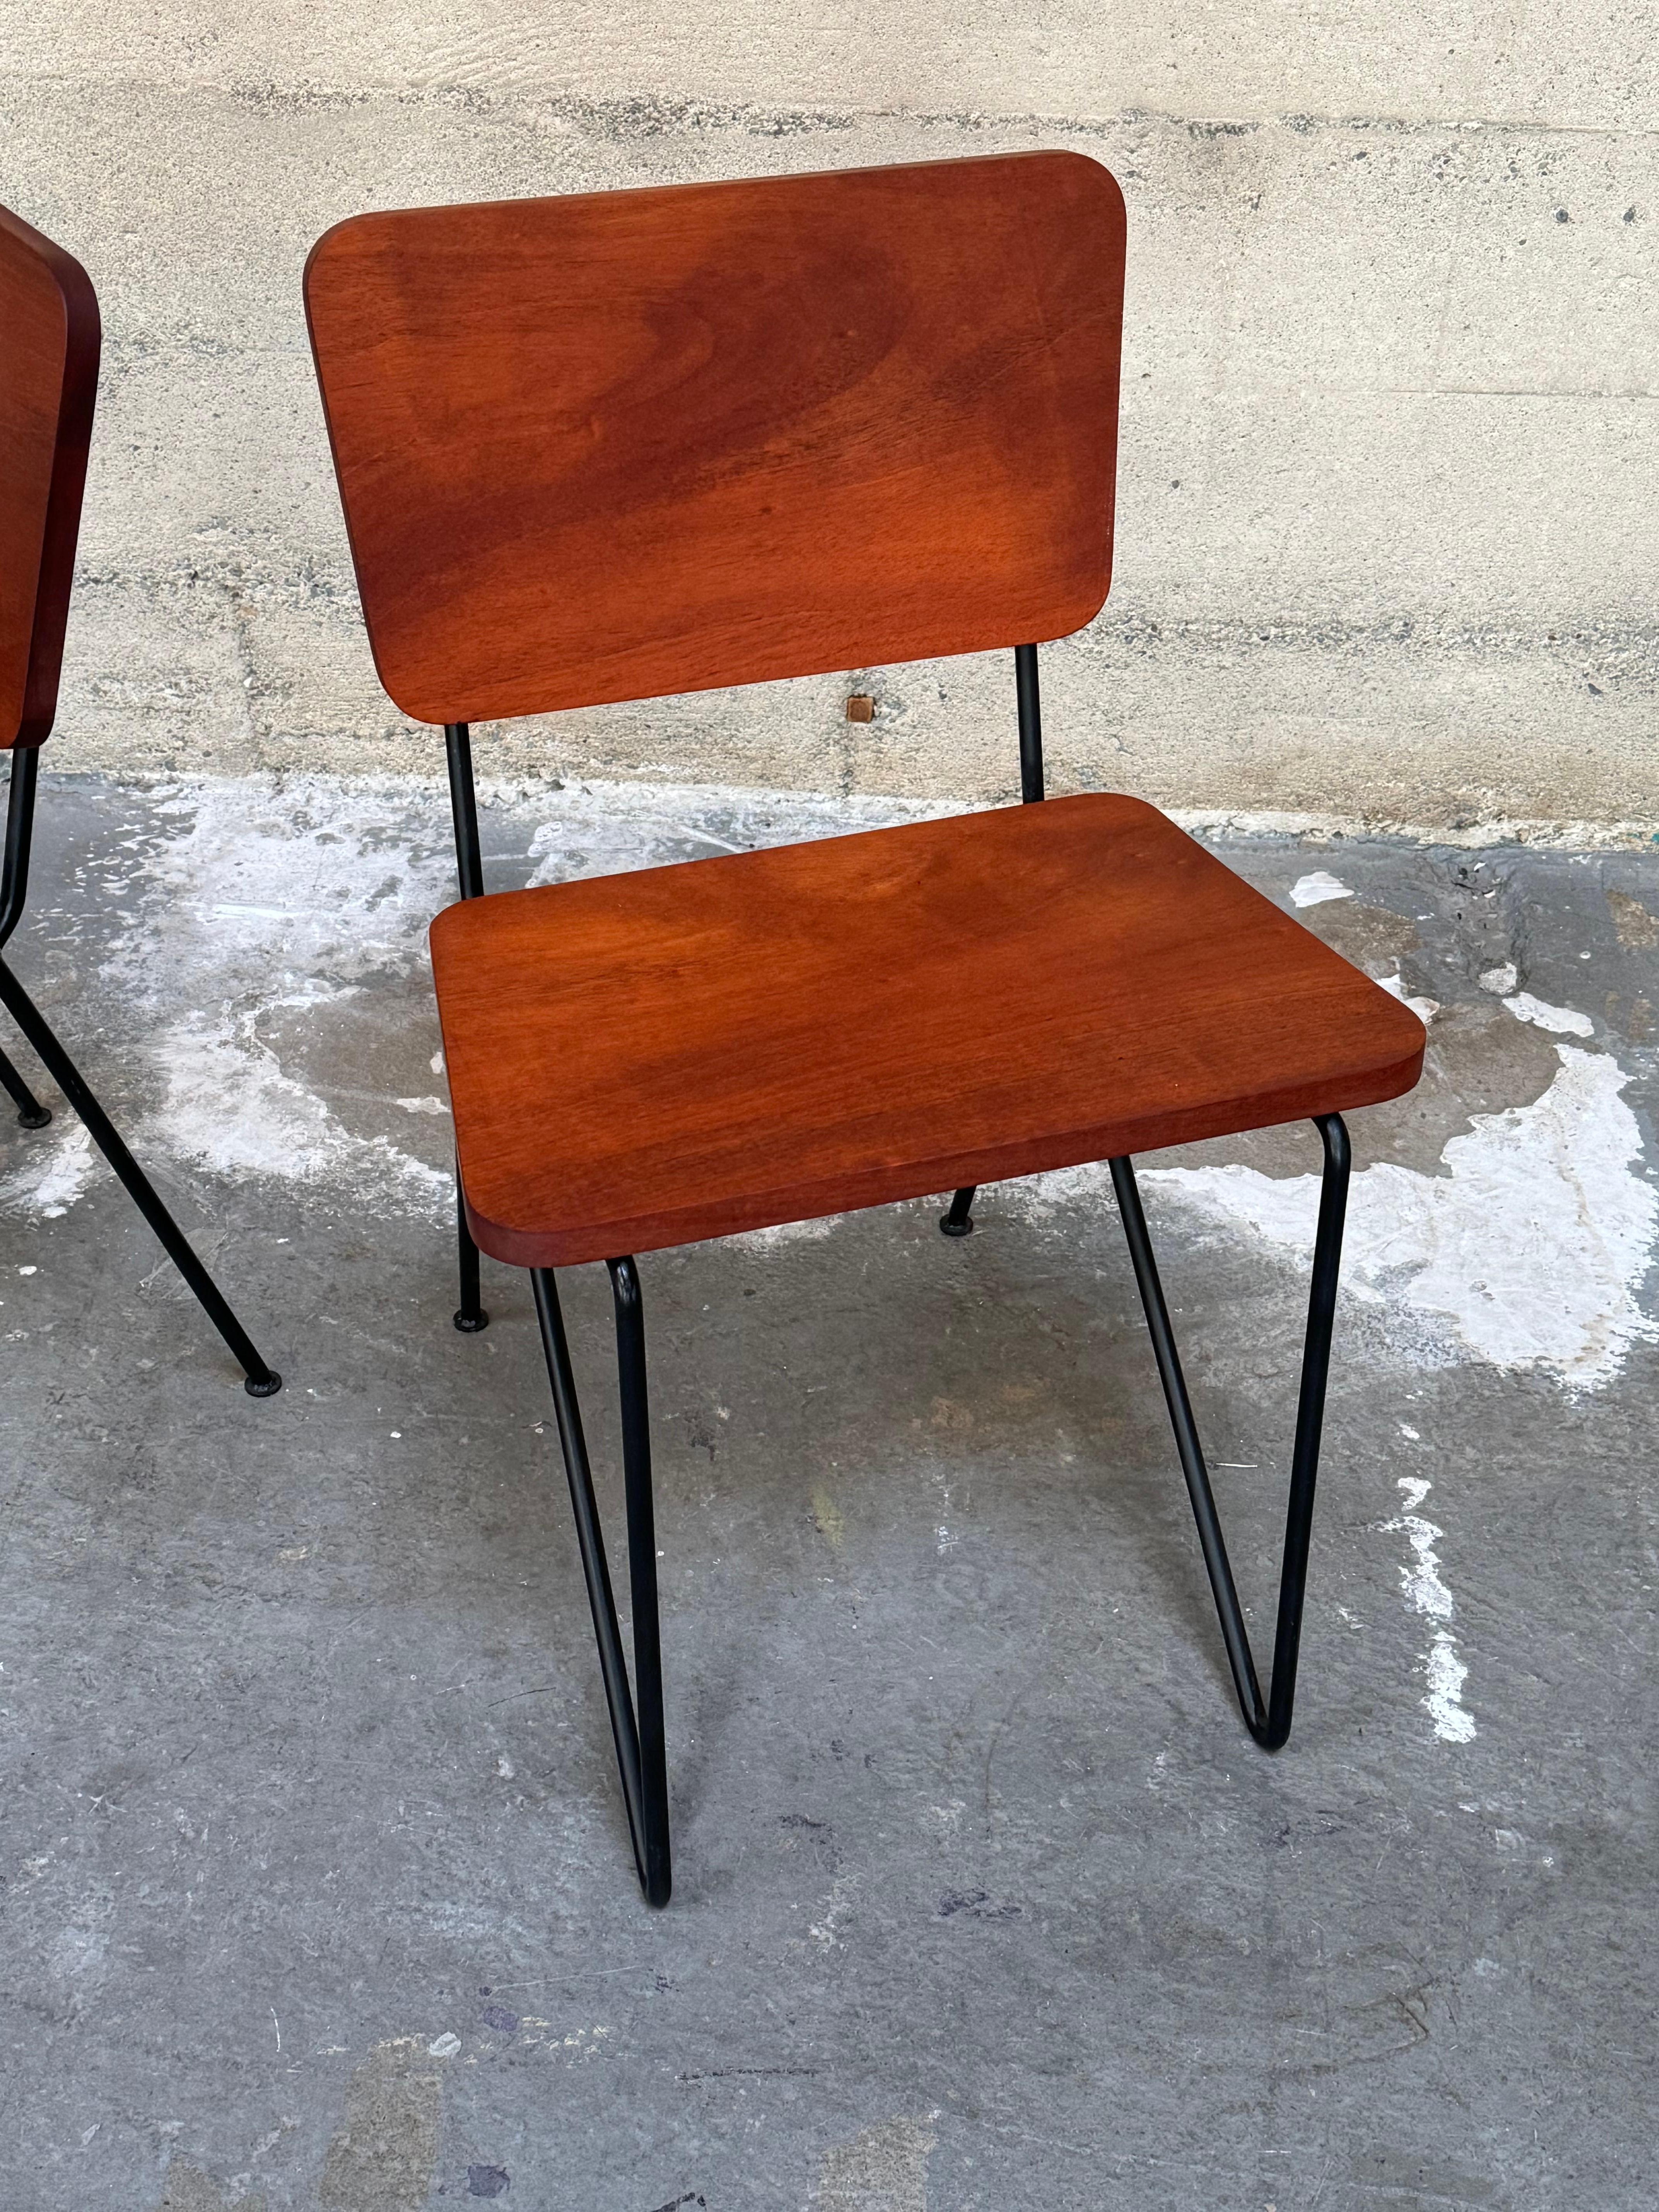 Hand-Crafted Pair of 1950s California Design Iron and Tropical Hardwood Side Chairs For Sale